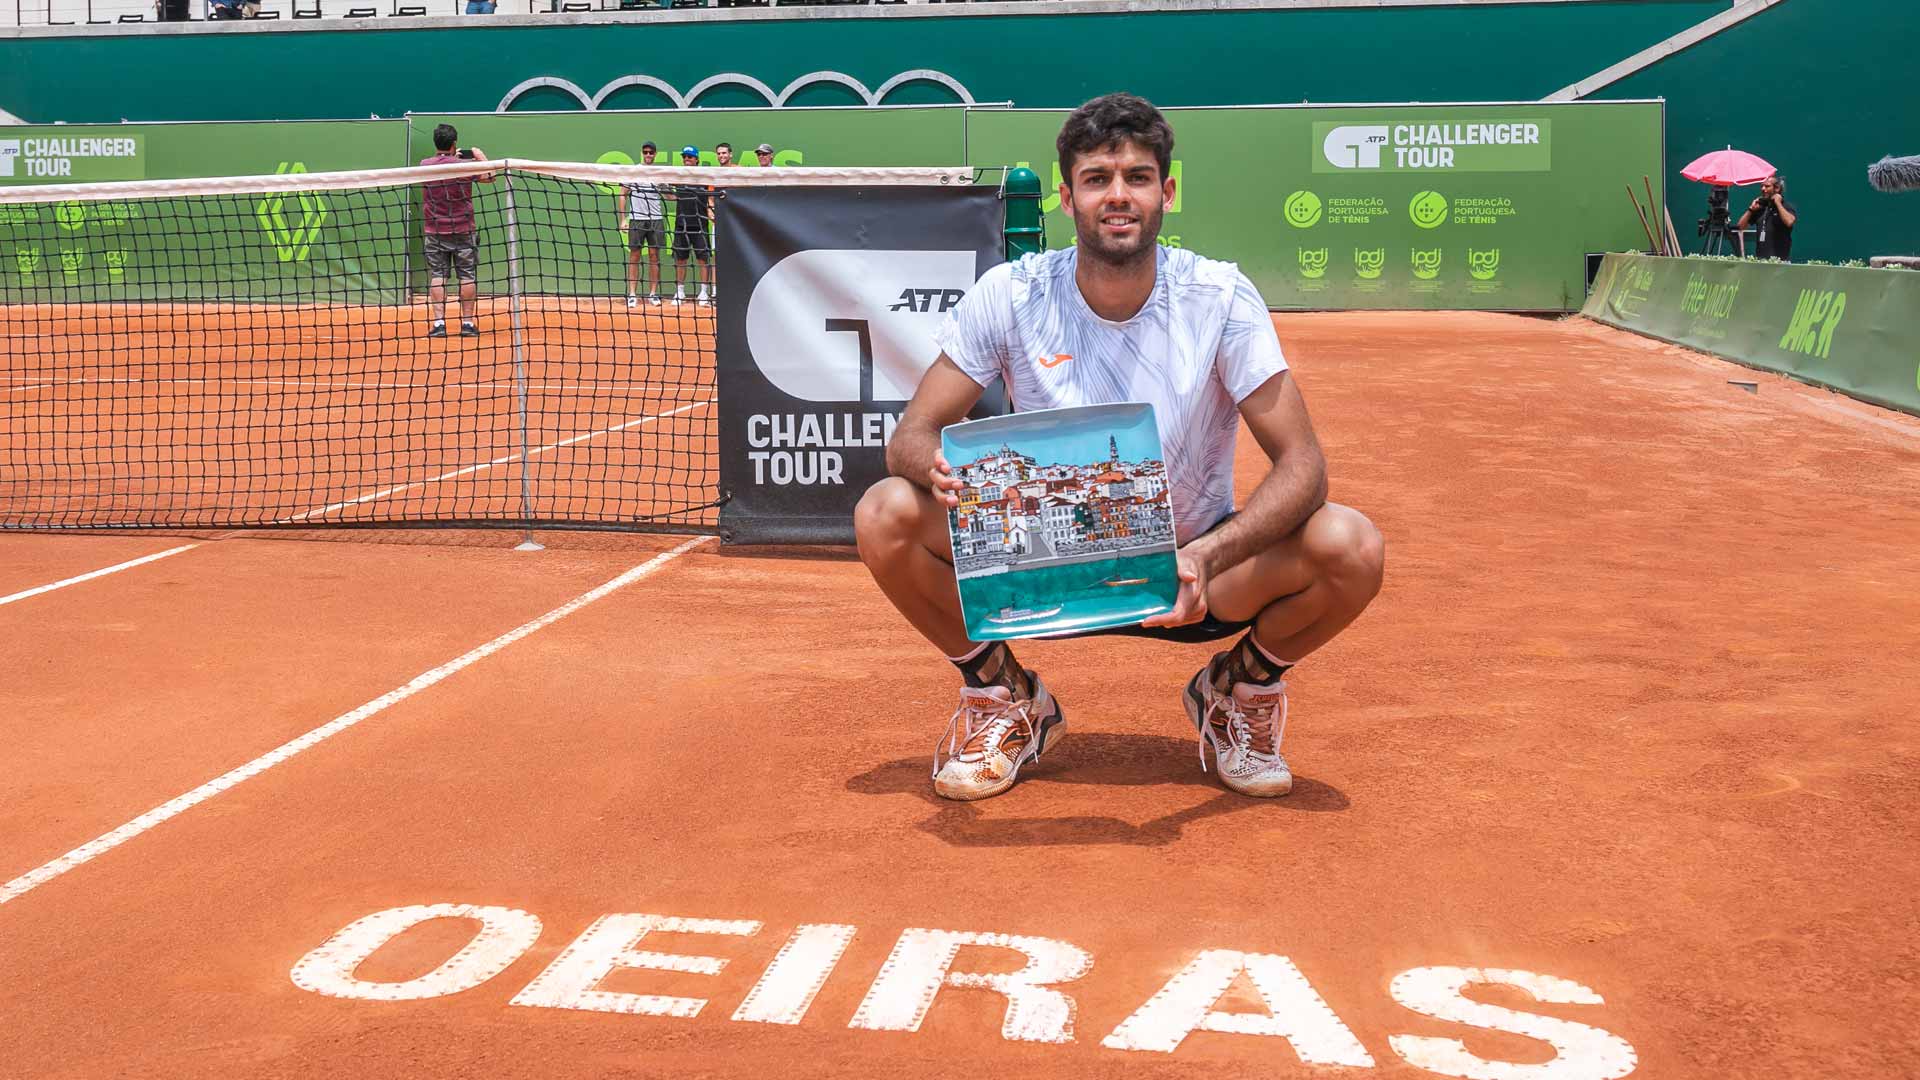 <a href='https://www.atptour.com/en/players/facundo-diaz-acosta/d0cg/overview'>Facundo Diaz Acosta</a> is crowned champion at the Challenger 75 event in Oeiras, Portugal.